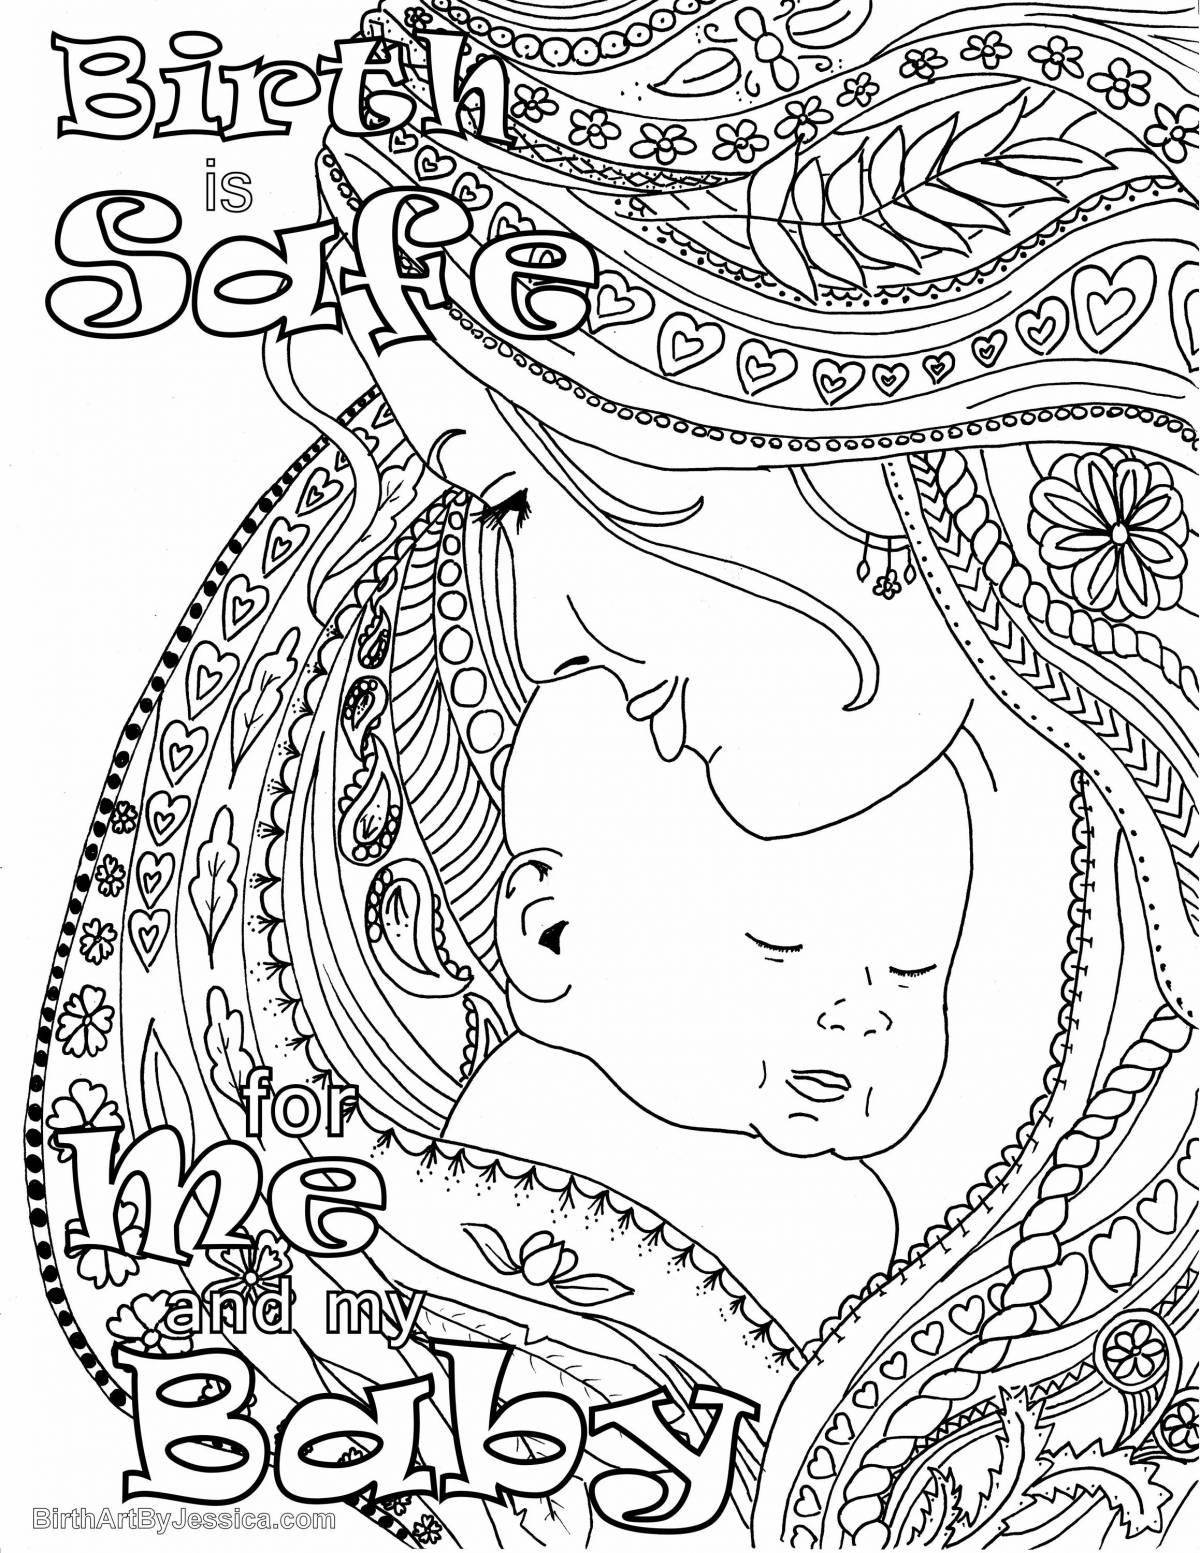 Anti-stress anti-aging coloring book for pregnant women